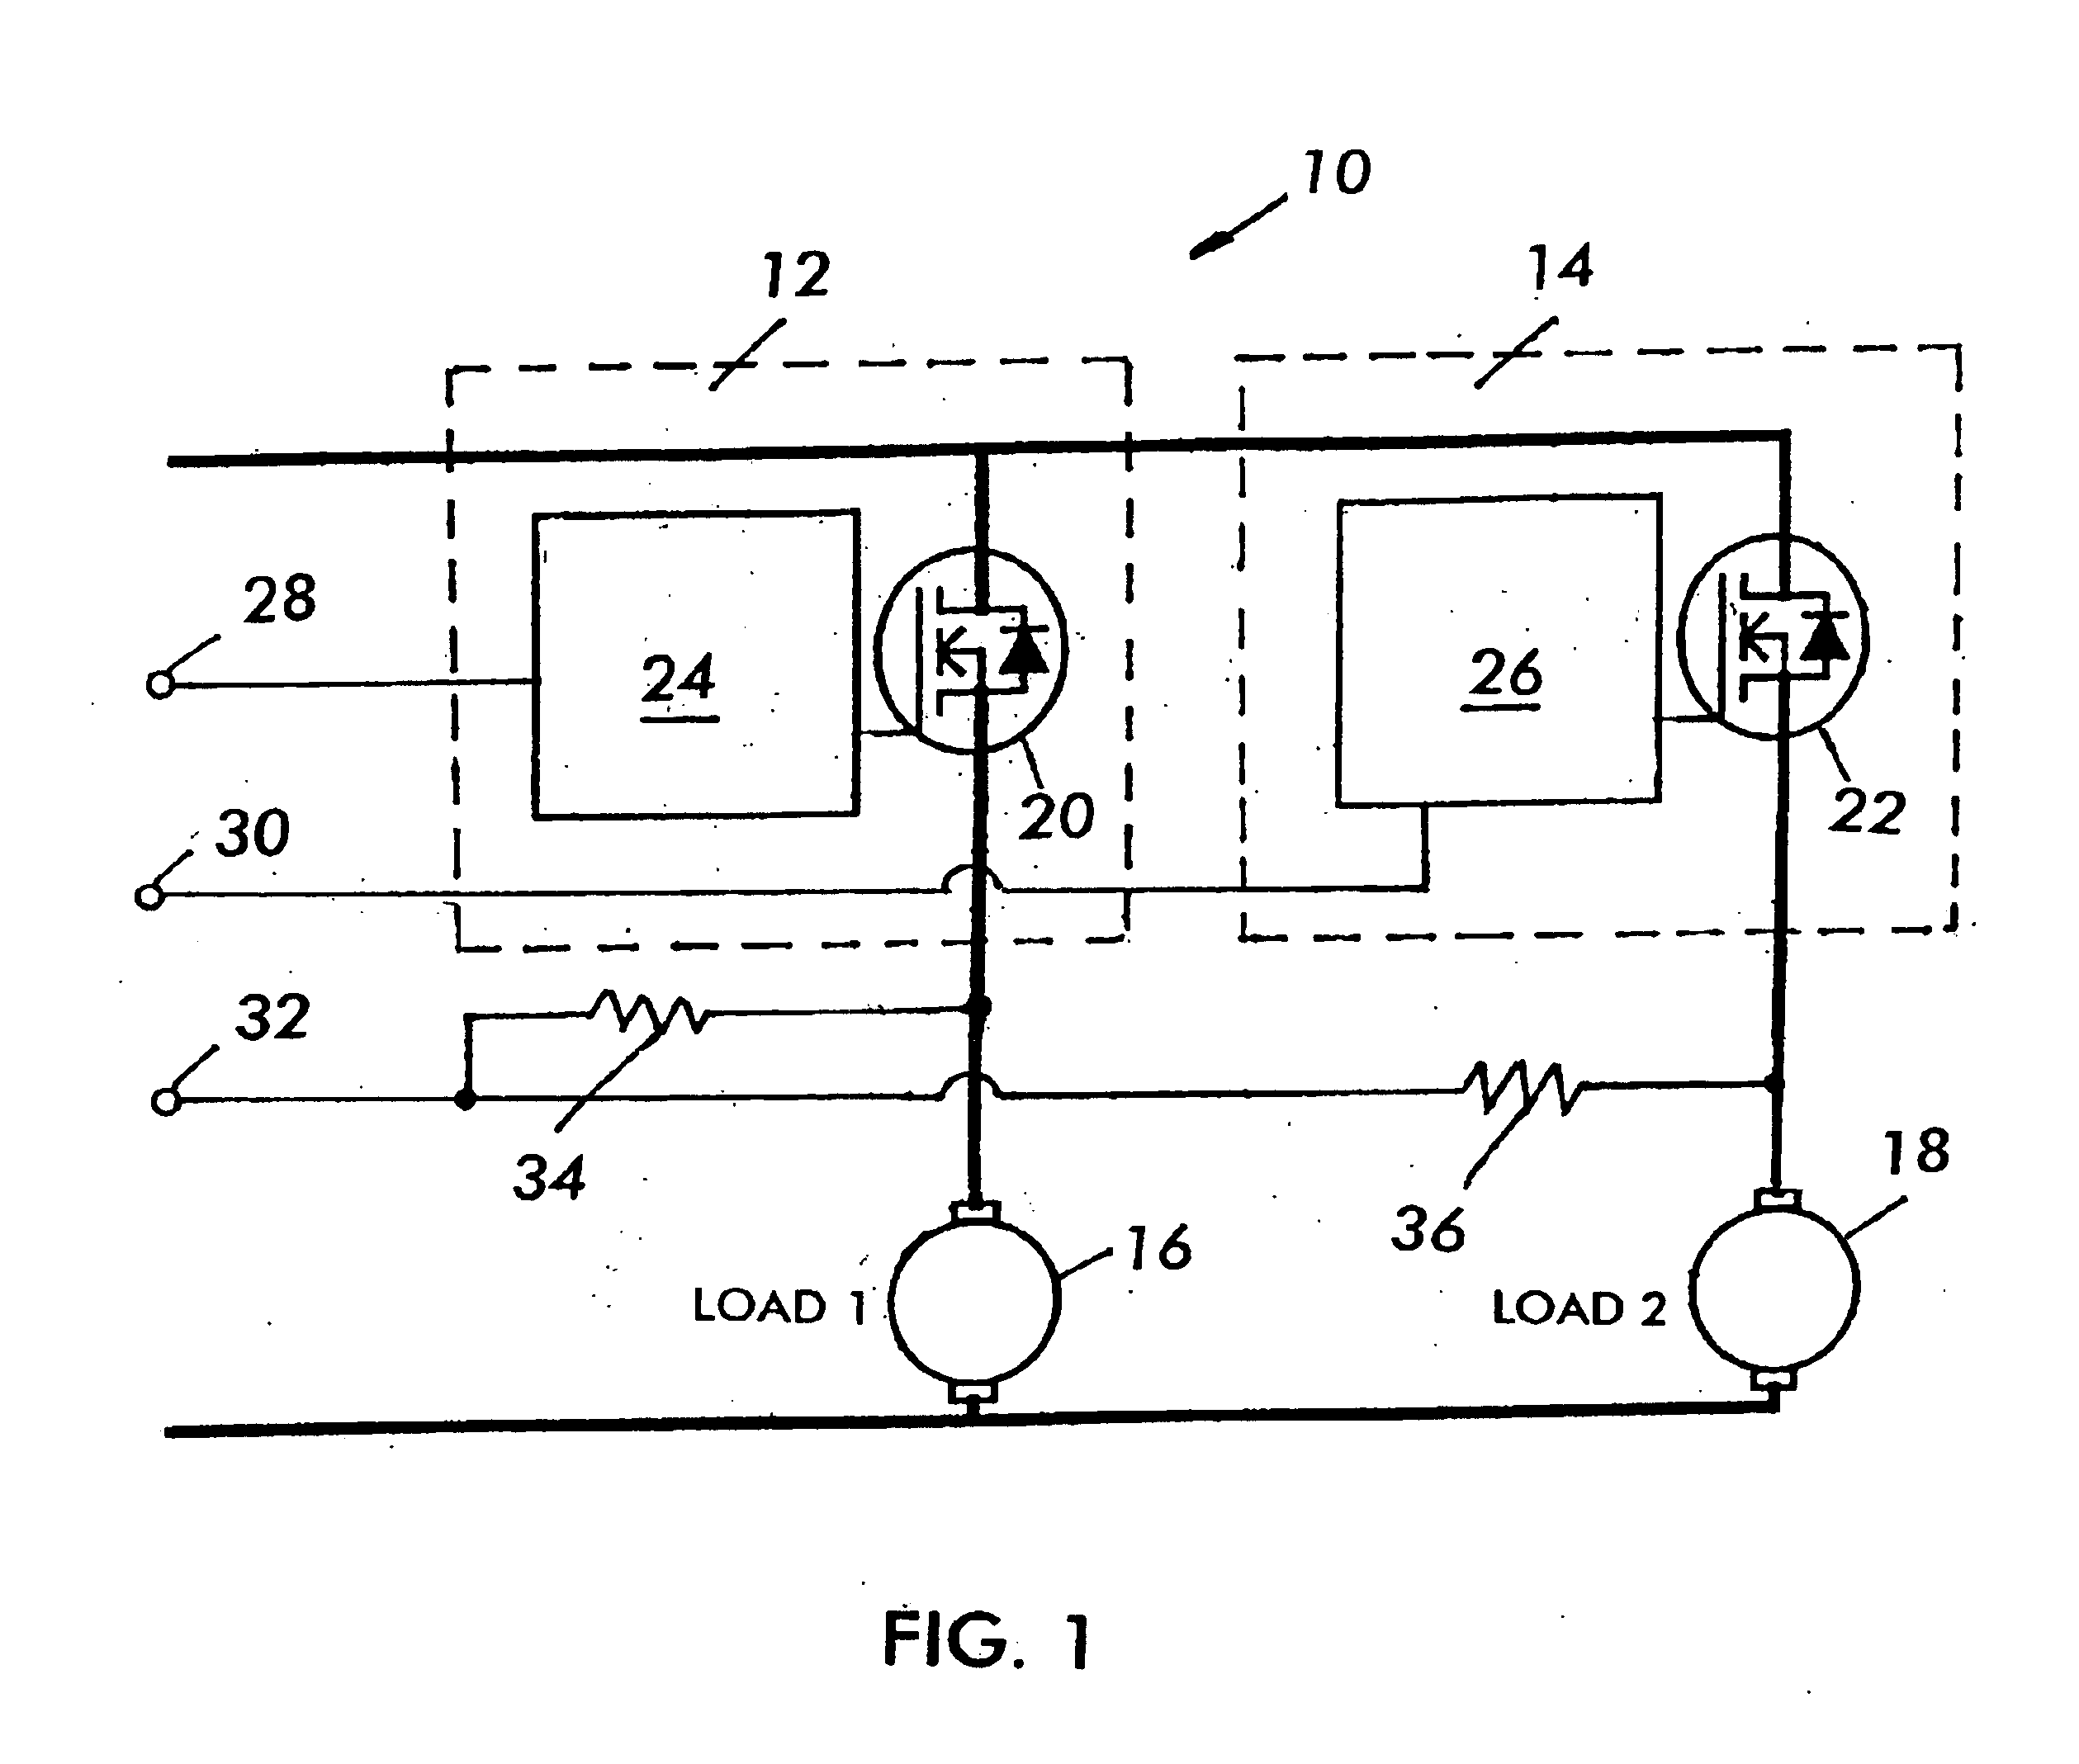 Fan control circuit and package